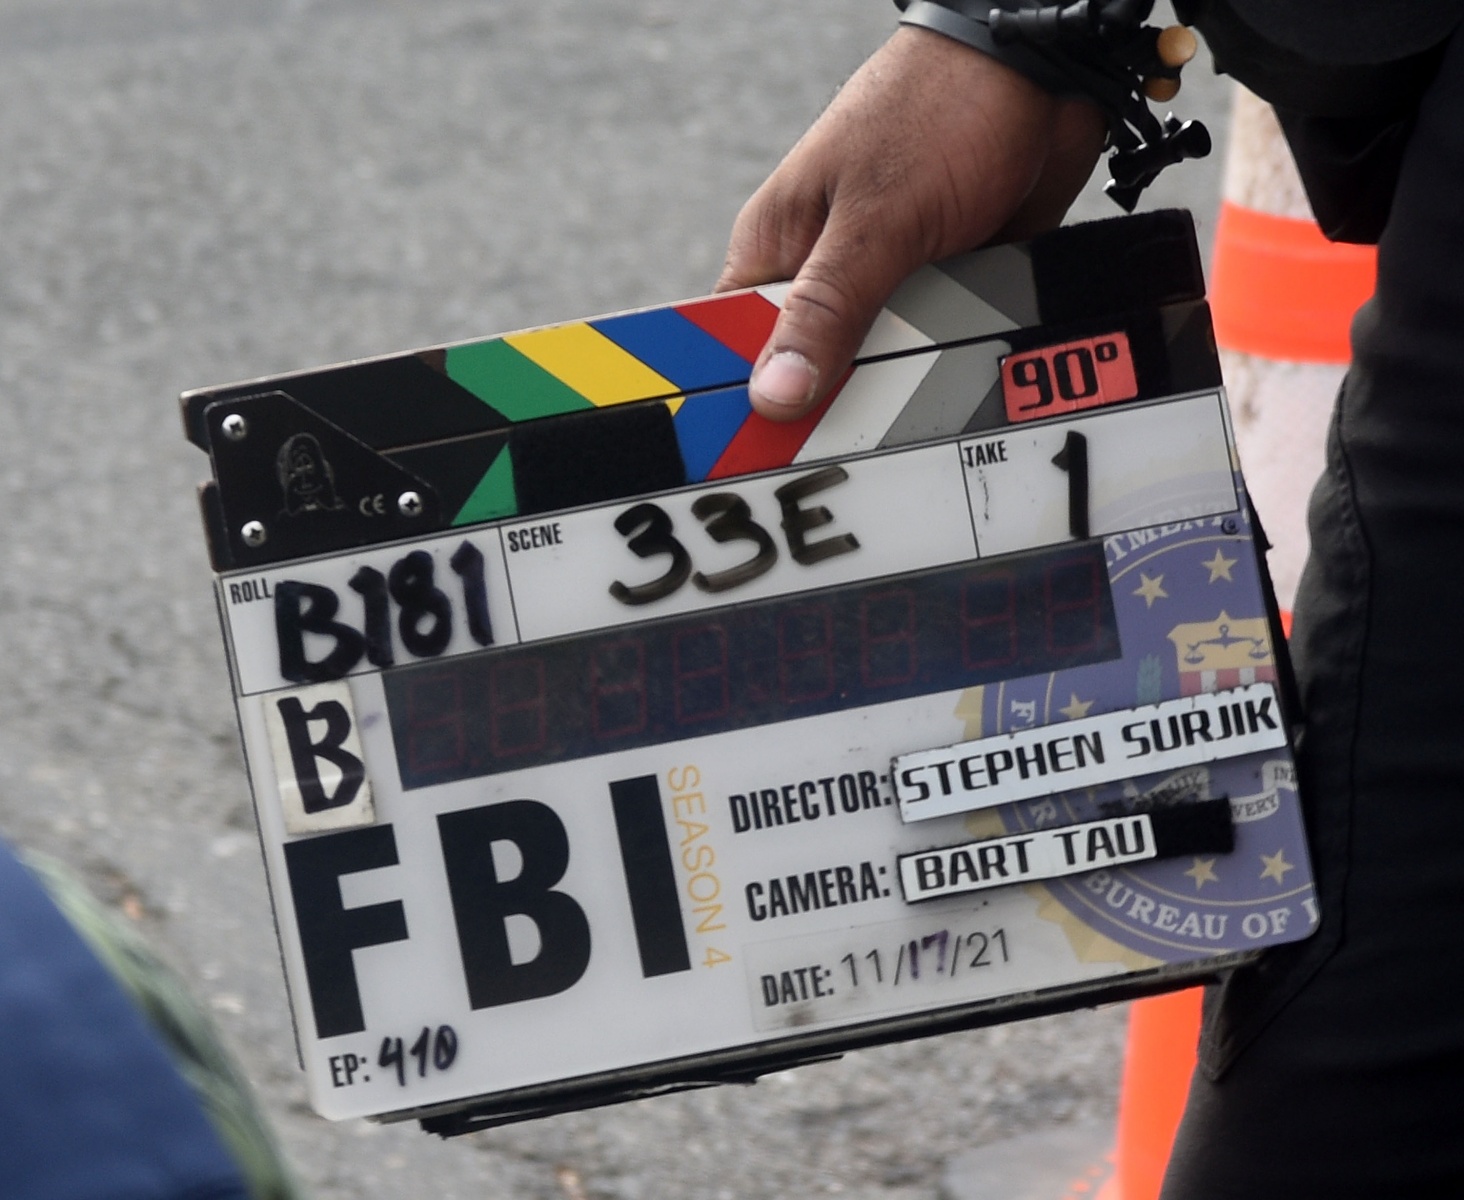  Atmosphere on the set of the TV series "FBI" November 17, 2021 in Tarrytown, New York. (Photo by Bobby Bank/GC Images)